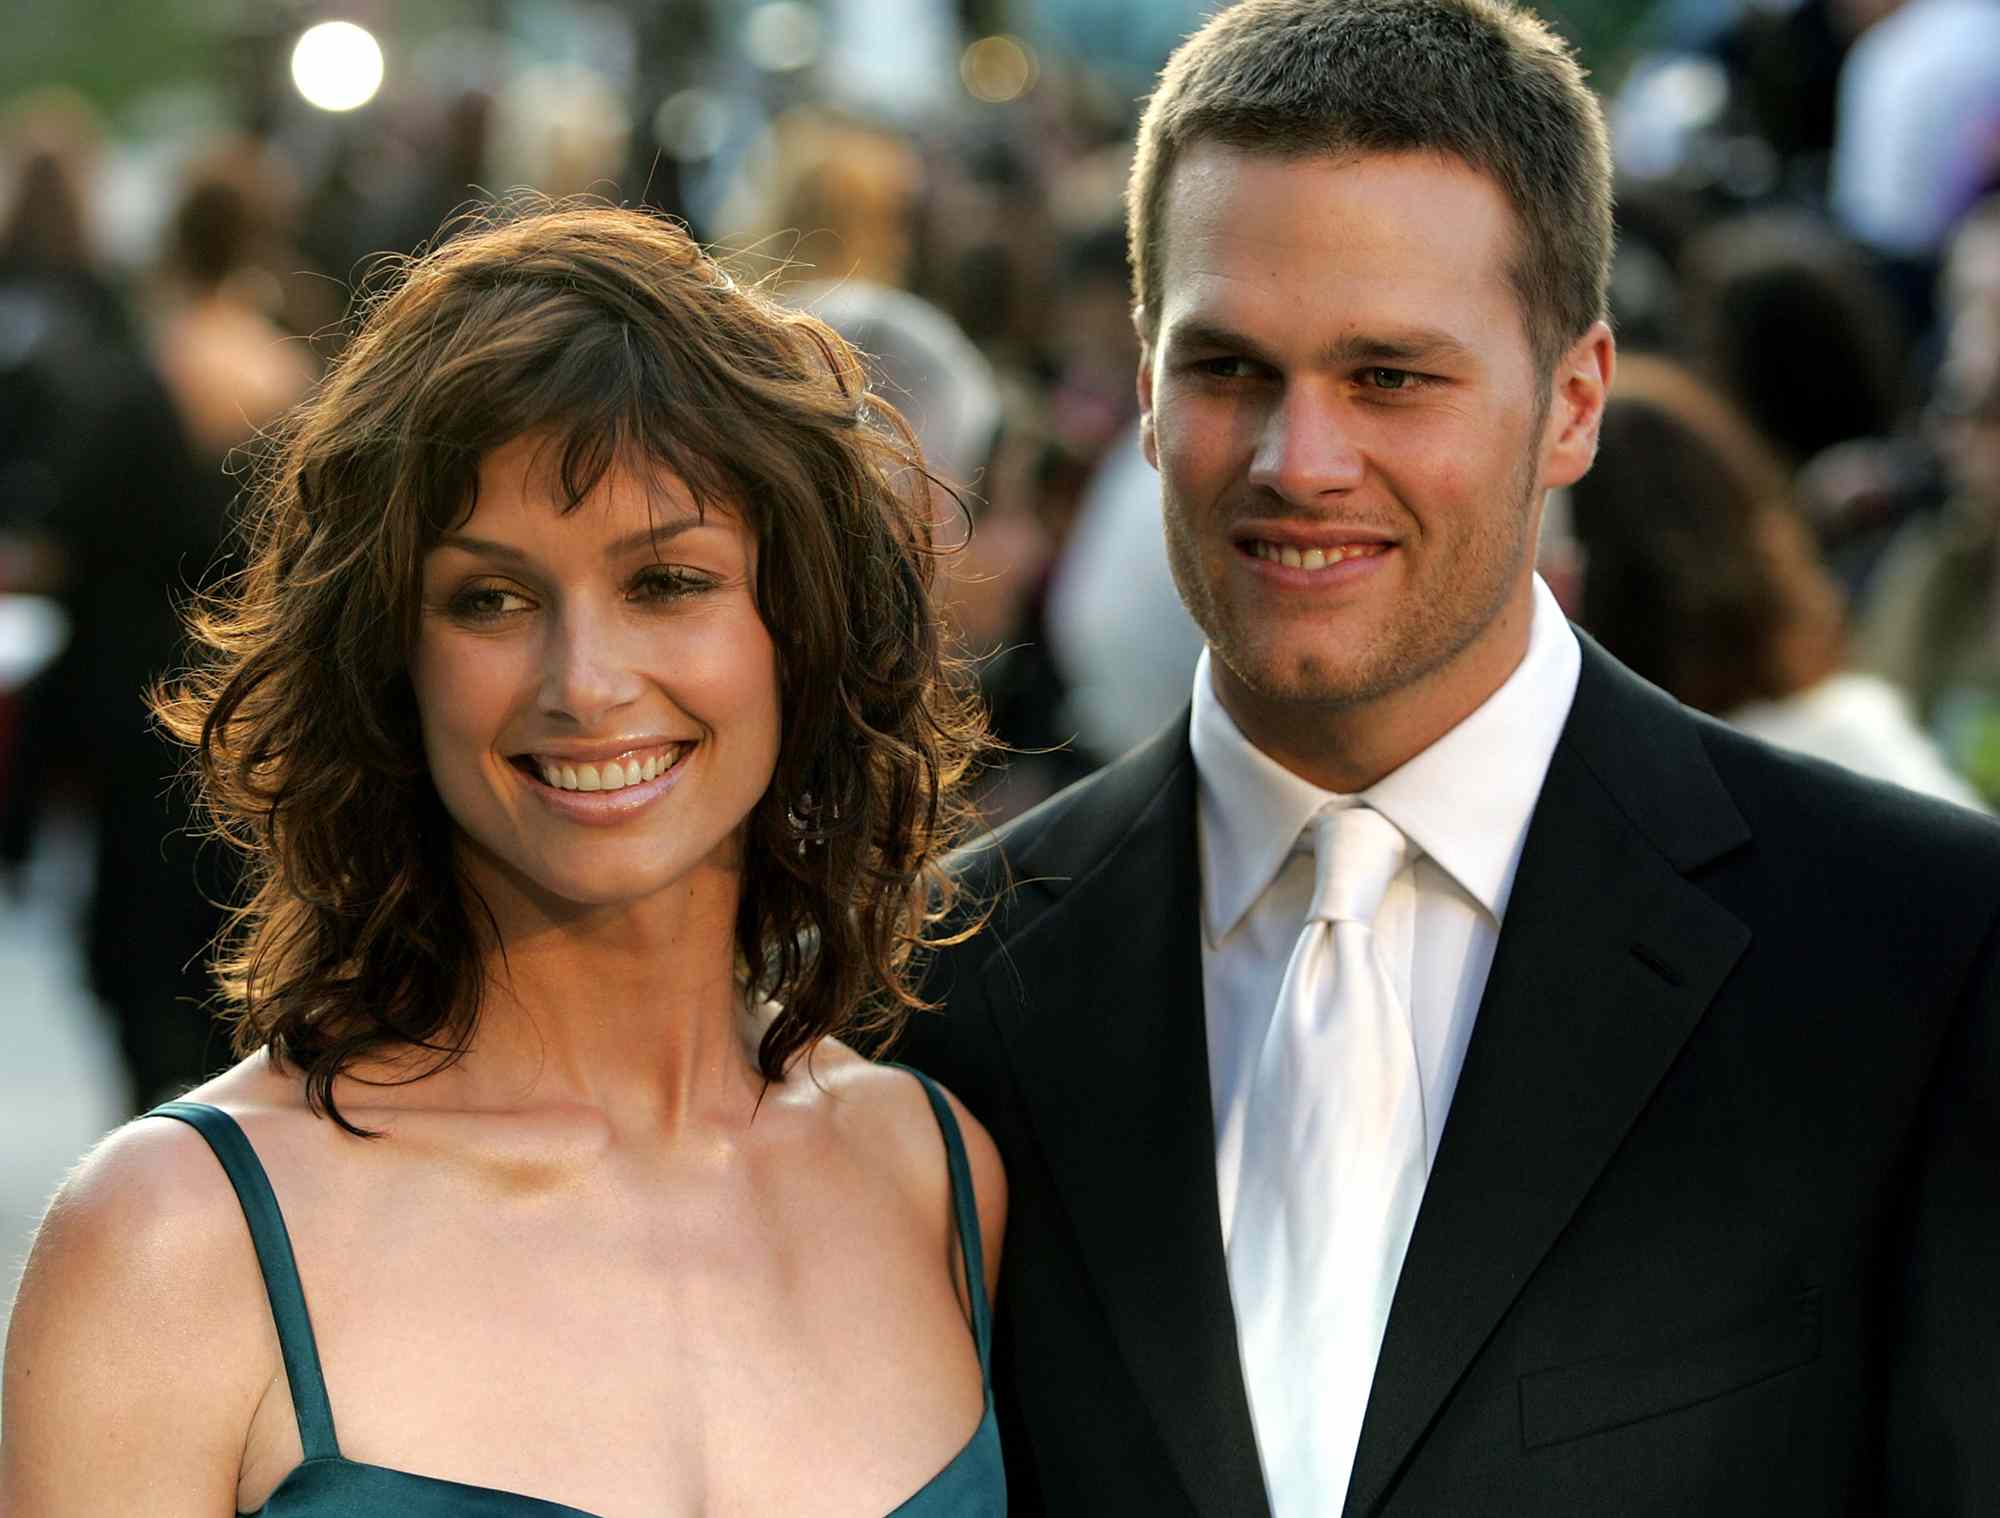 Bridget Moynahan and quarterback Tom Brady and arrives at the Vanity Fair Oscar Party at Mortons on February 27, 2005 in West Hollywood, California